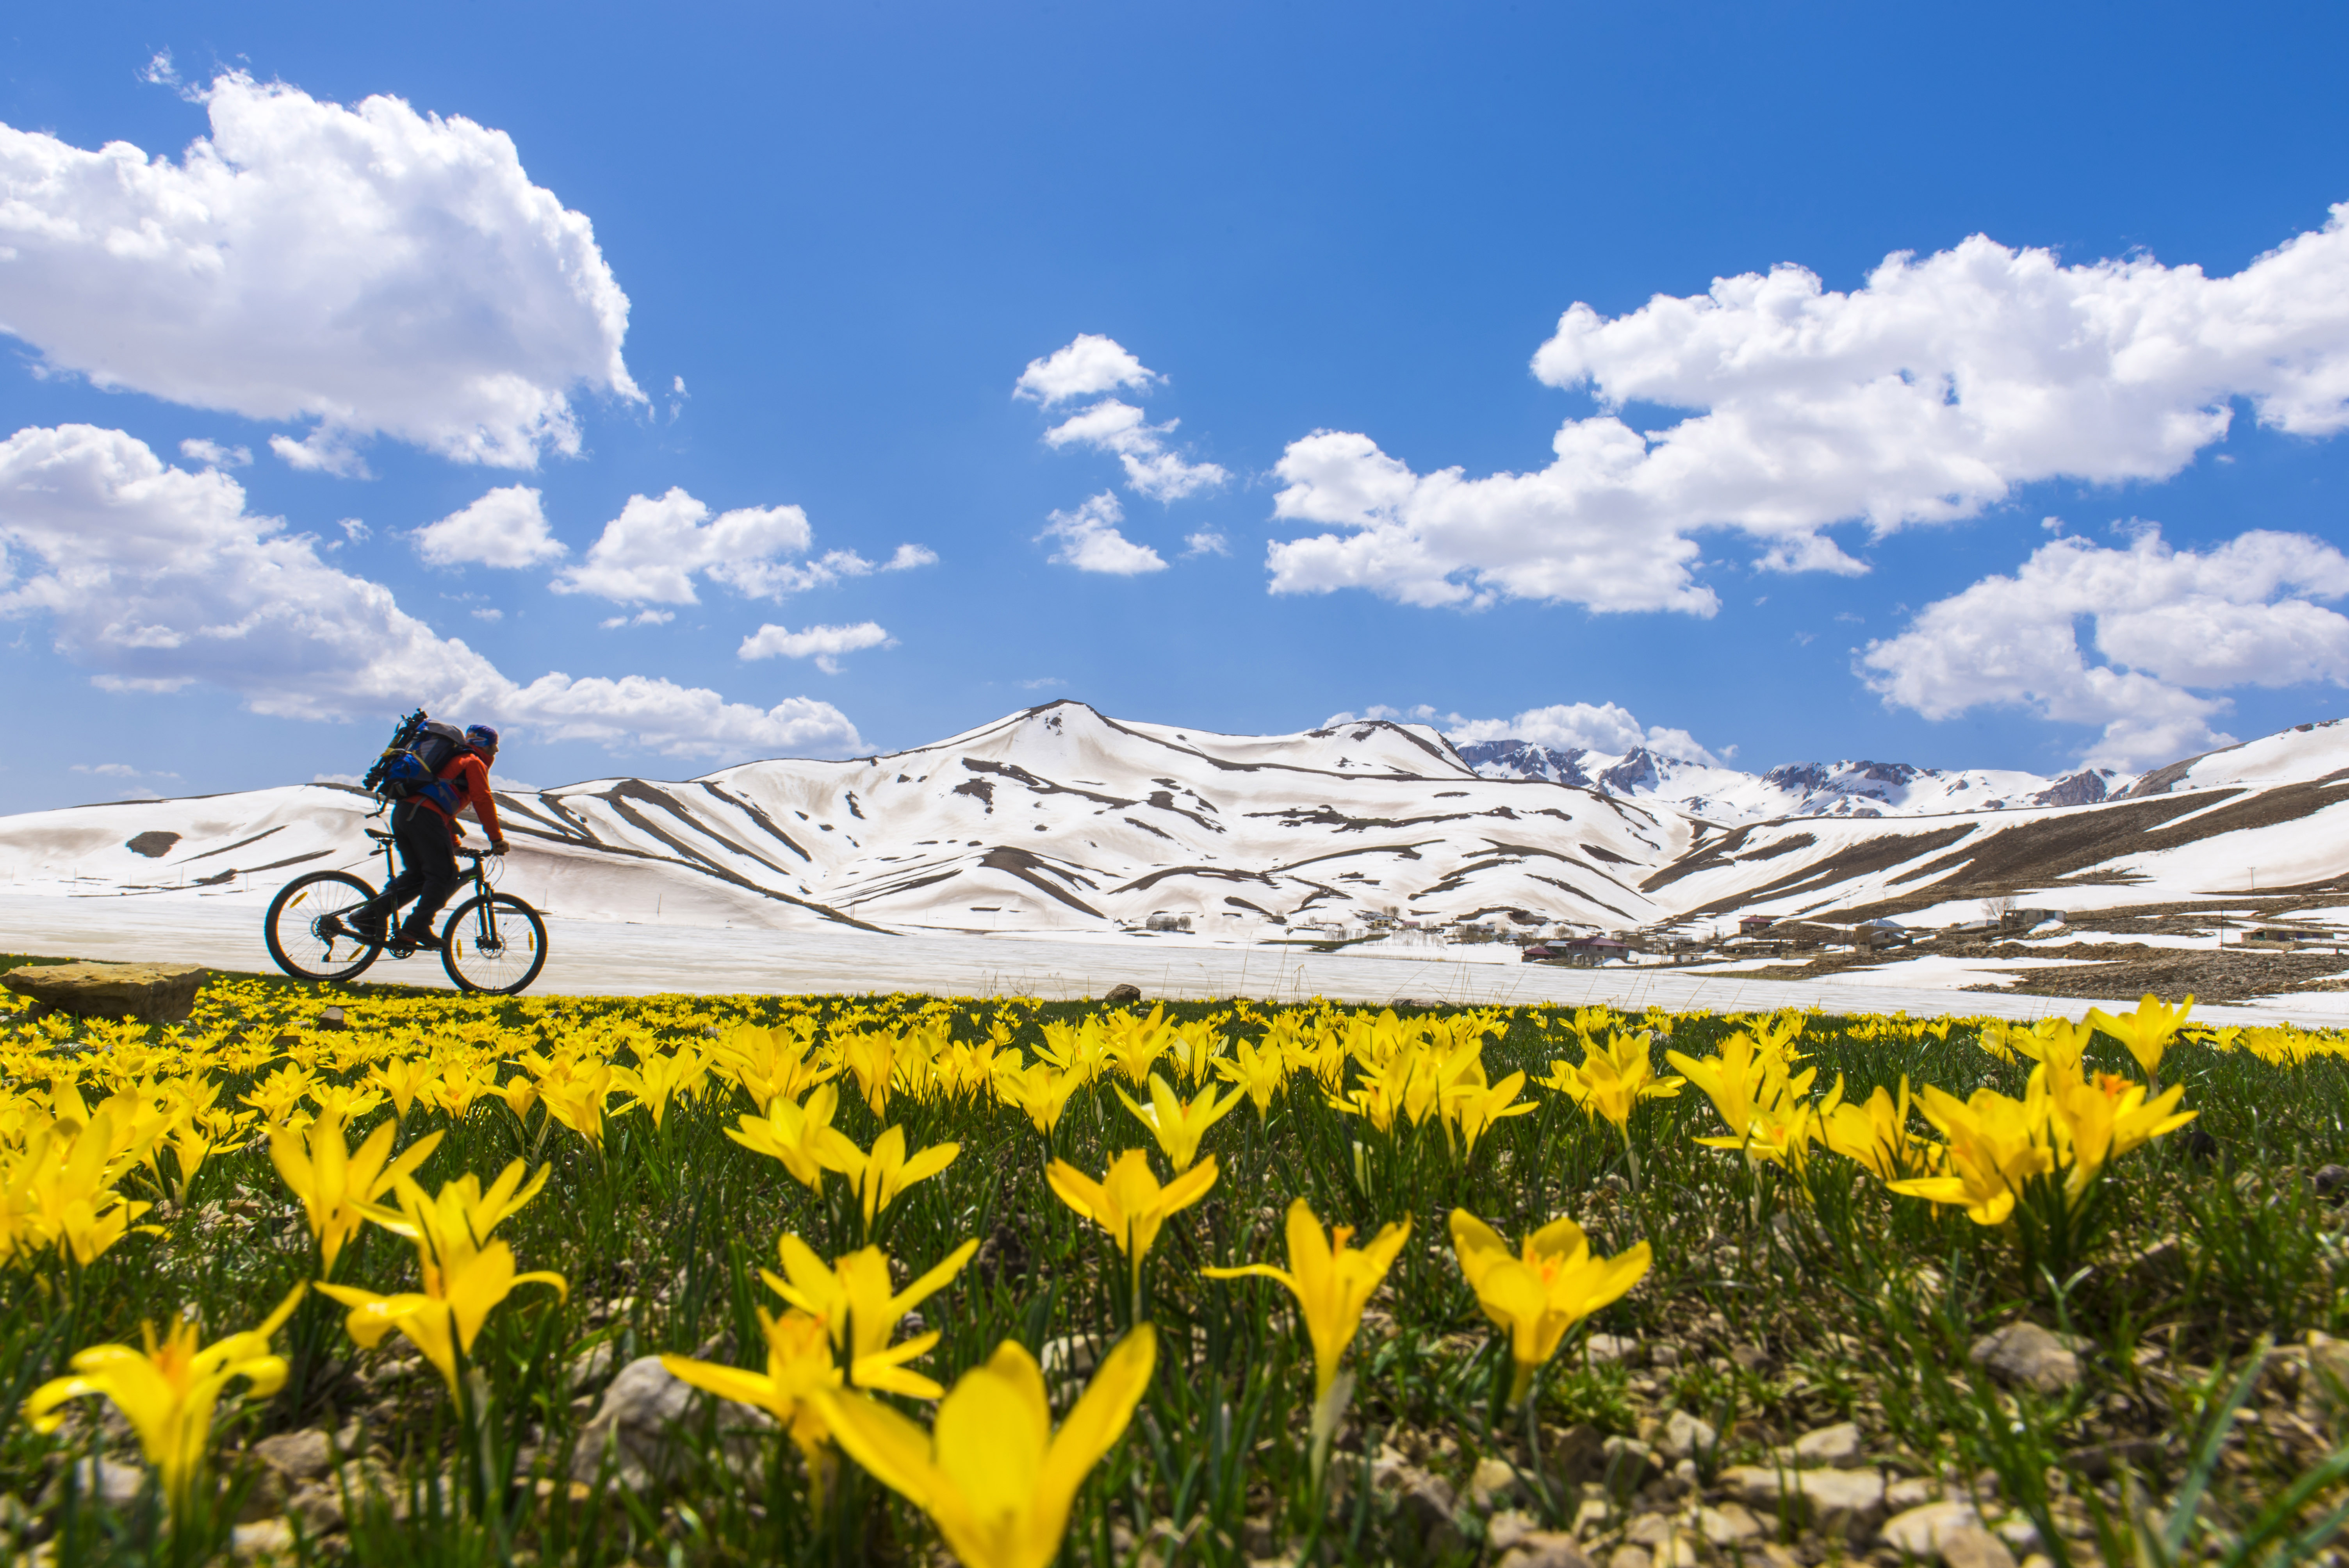 Biker Going Past Mountain Landscape With Flowers Image Free